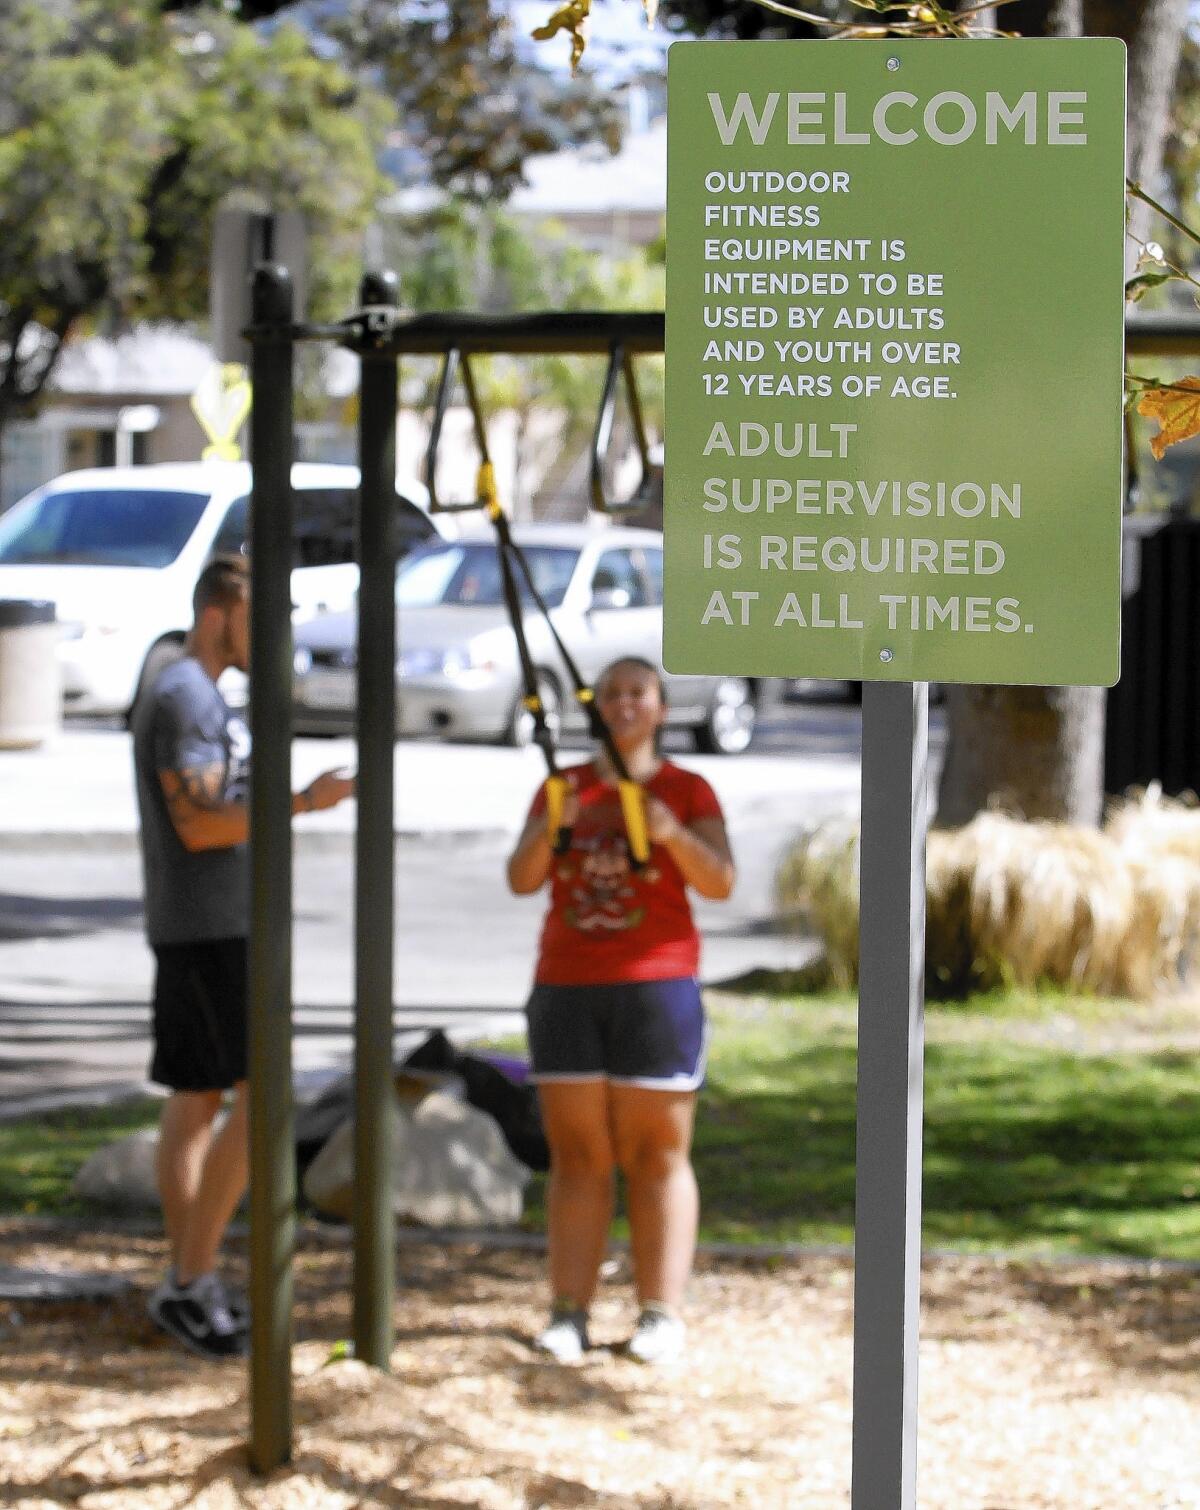 Rachel Barker, 19, of Tujunga, with the help of personal trainer Tony Snyder, left, works out in the recently built area designated only for those age 12 and older, at Maple Park in Glendale on Thursday, Sept. 4, 2014.